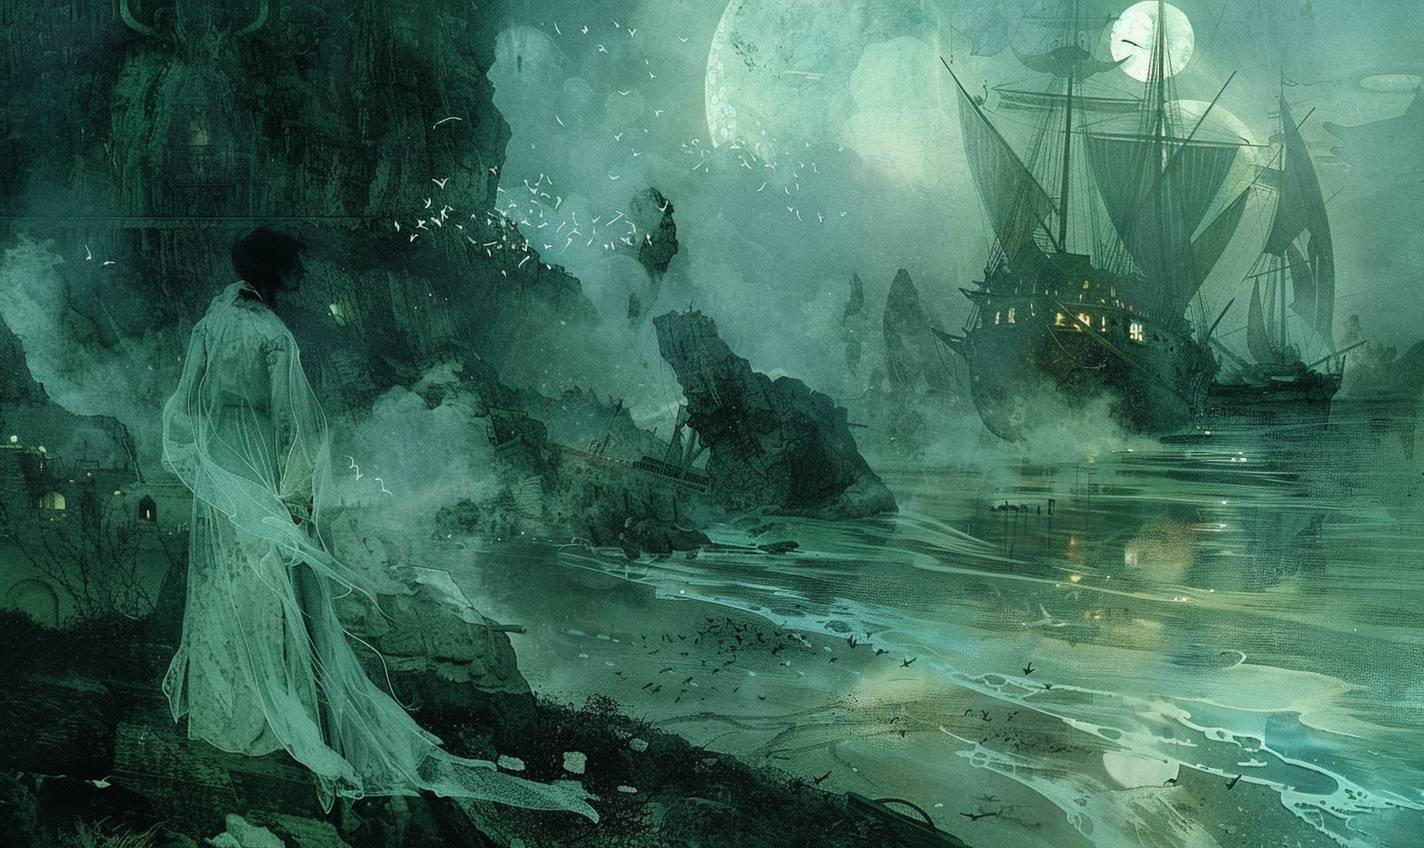 In the style of Alphonso Mucha, a ghostly shipwreck on a haunted shore